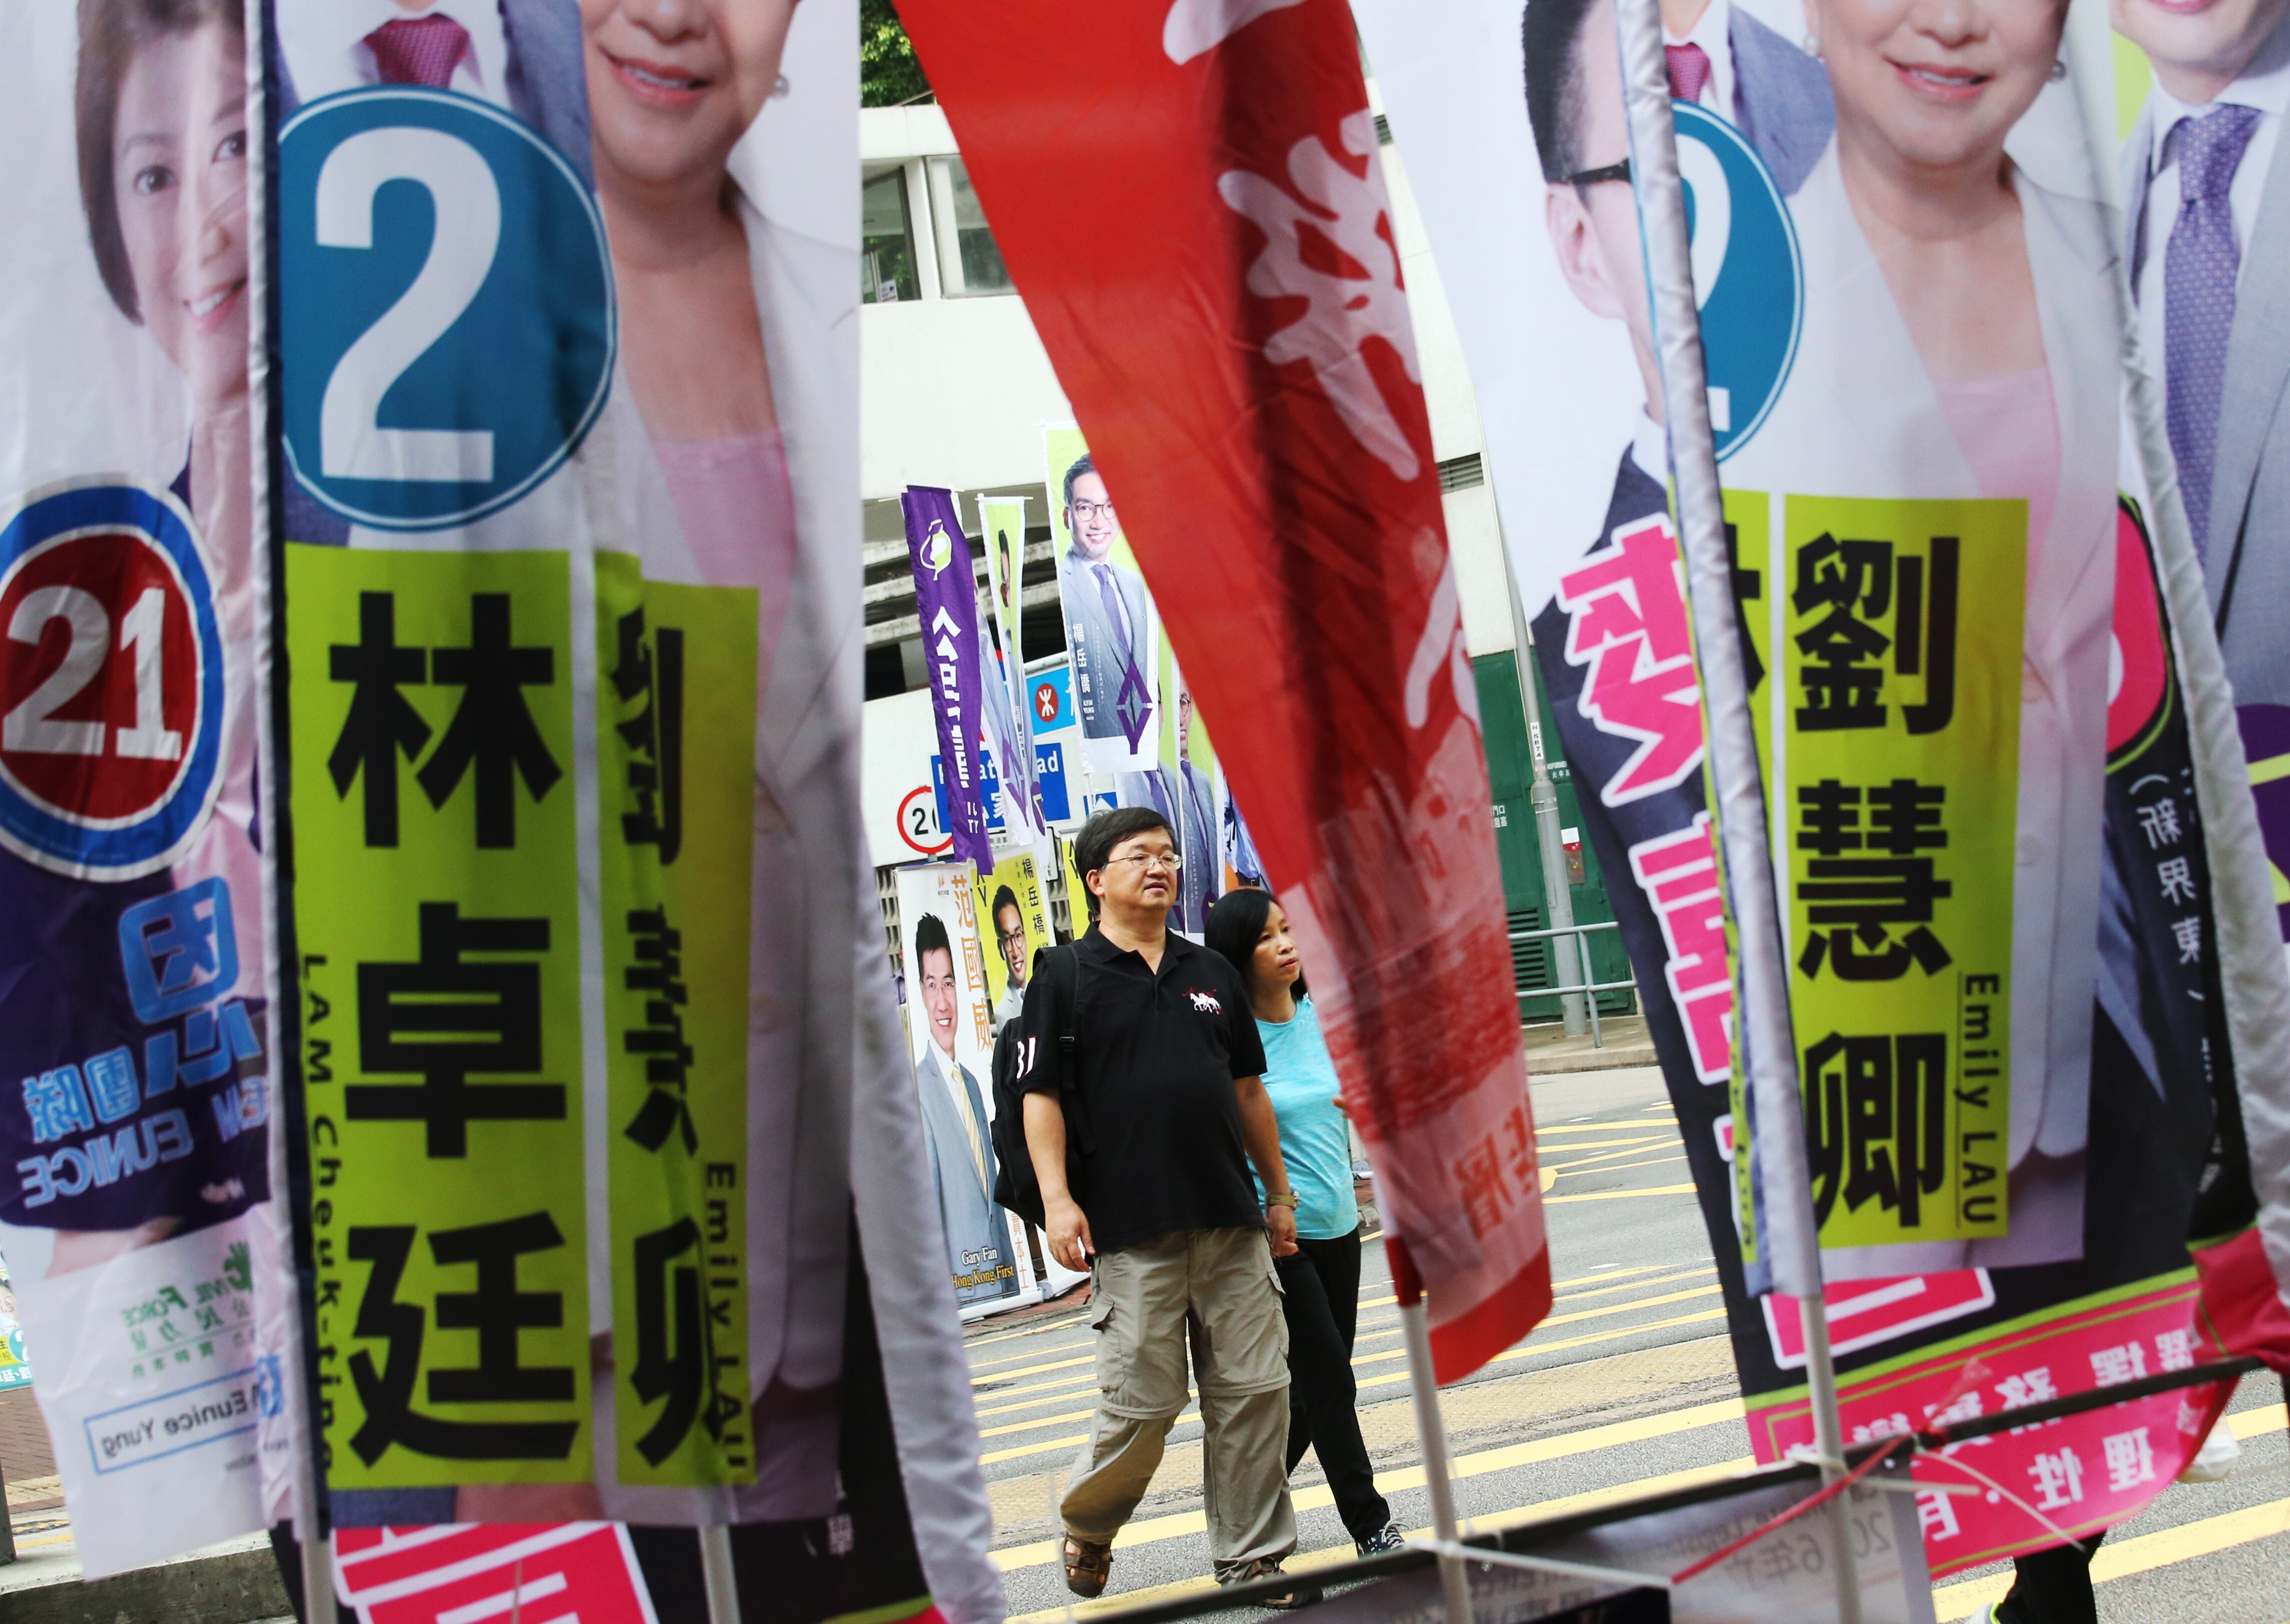 People walk towards a voting centre on a street festooned with campaign banners in Sha Tin during the previous Legco election, in September 2016. The political environment in Hong Kong has changed dramatically since then. Photo: David Wong